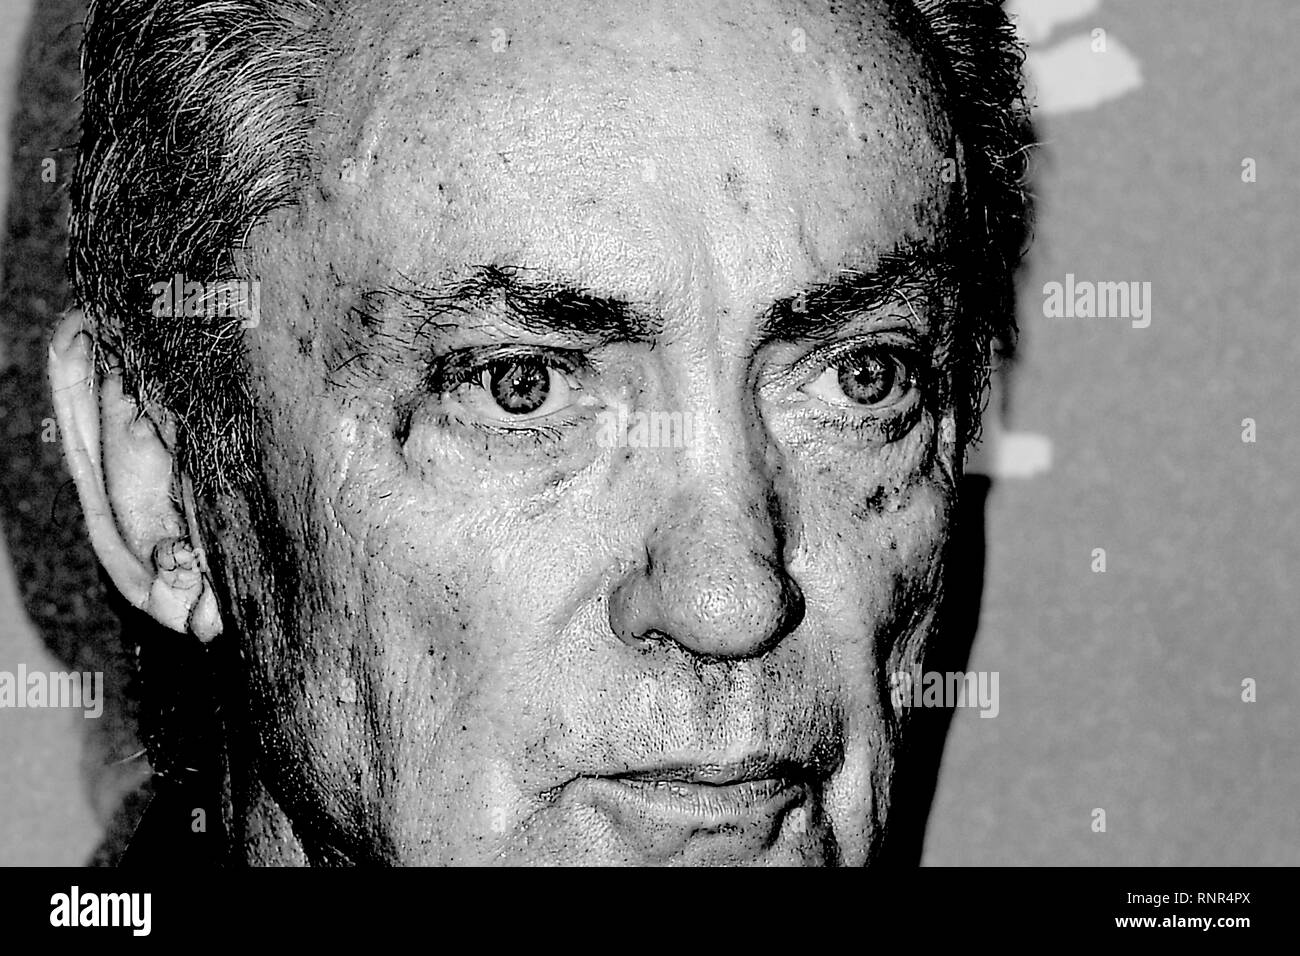 Udo Kier attends the Holy Beasts photocall during the 69th Berlin Film Festival at the Grand Hyatt Hotel in Berlin. © Paul Treadway Stock Photo